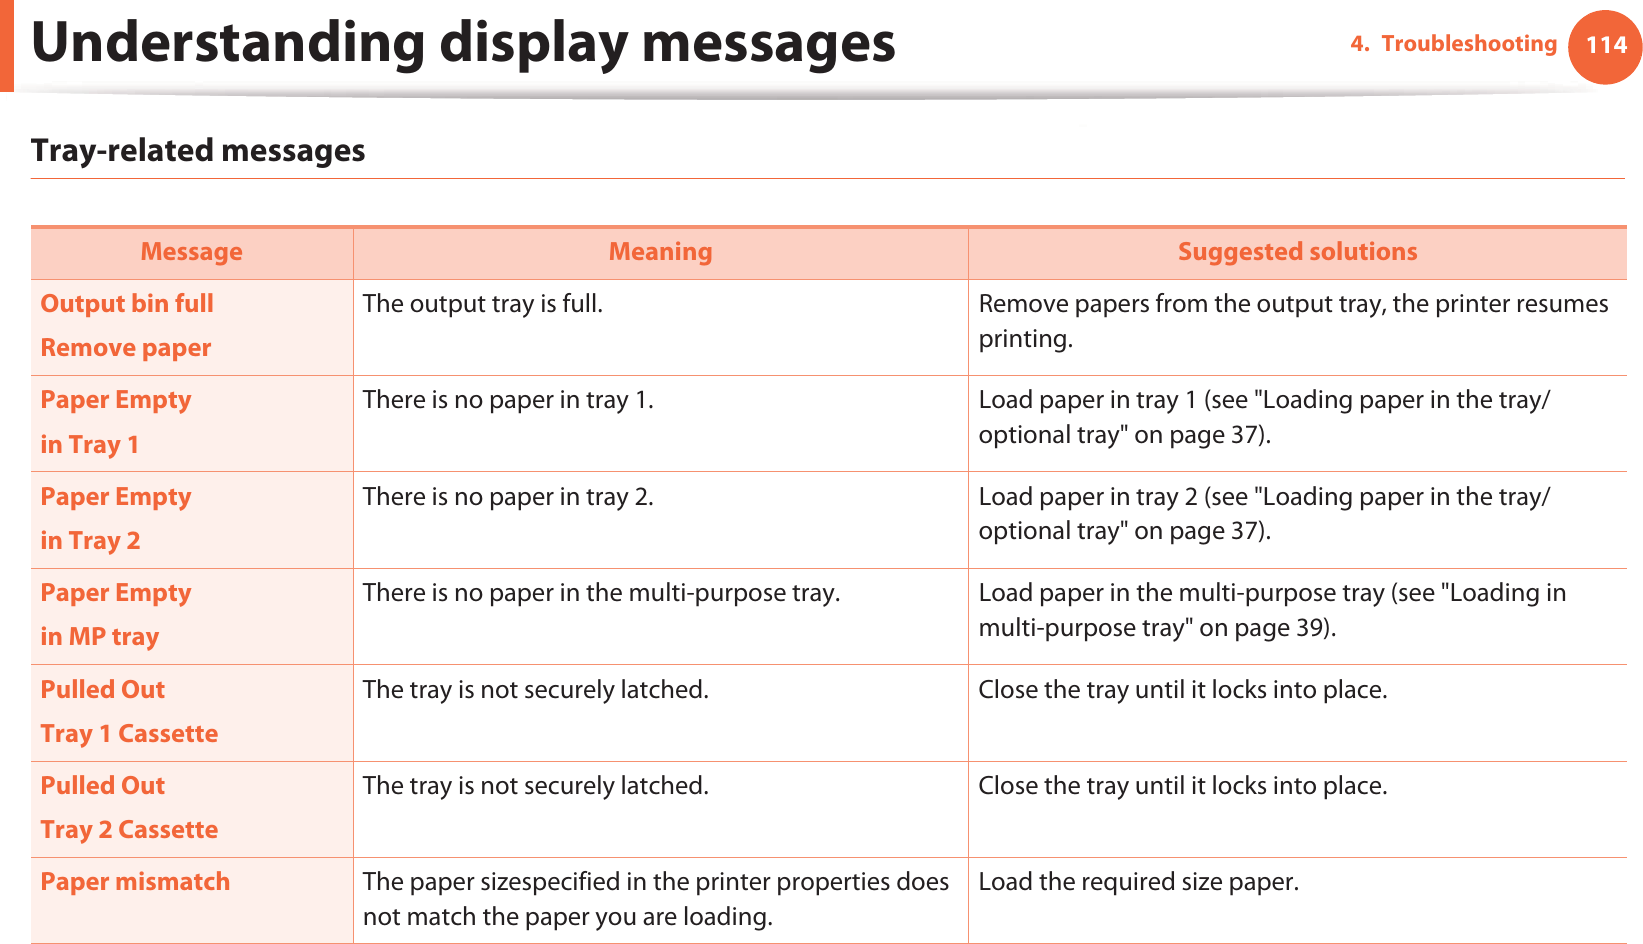 Understanding display messages 1144. TroubleshootingTray-related messagesMessage Meaning Suggested solutionsOutput bin fullRemove paperThe output tray is full.  Remove papers from the output tray, the printer resumes printing. Paper Emptyin Tray 1There is no paper in tray 1.  Load paper in tray 1 (see &quot;Loading paper in the tray/ optional tray&quot; on page 37).Paper Emptyin Tray 2There is no paper in tray 2.  Load paper in tray 2 (see &quot;Loading paper in the tray/ optional tray&quot; on page 37).Paper Emptyin MP trayThere is no paper in the multi-purpose tray.  Load paper in the multi-purpose tray (see &quot;Loading in multi-purpose tray&quot; on page 39).Pulled OutTray 1 CassetteThe tray is not securely latched.  Close the tray until it locks into place.Pulled OutTray 2 CassetteThe tray is not securely latched.  Close the tray until it locks into place.Paper mismatch The paper sizespecified in the printer properties does not match the paper you are loading.Load the required size paper.